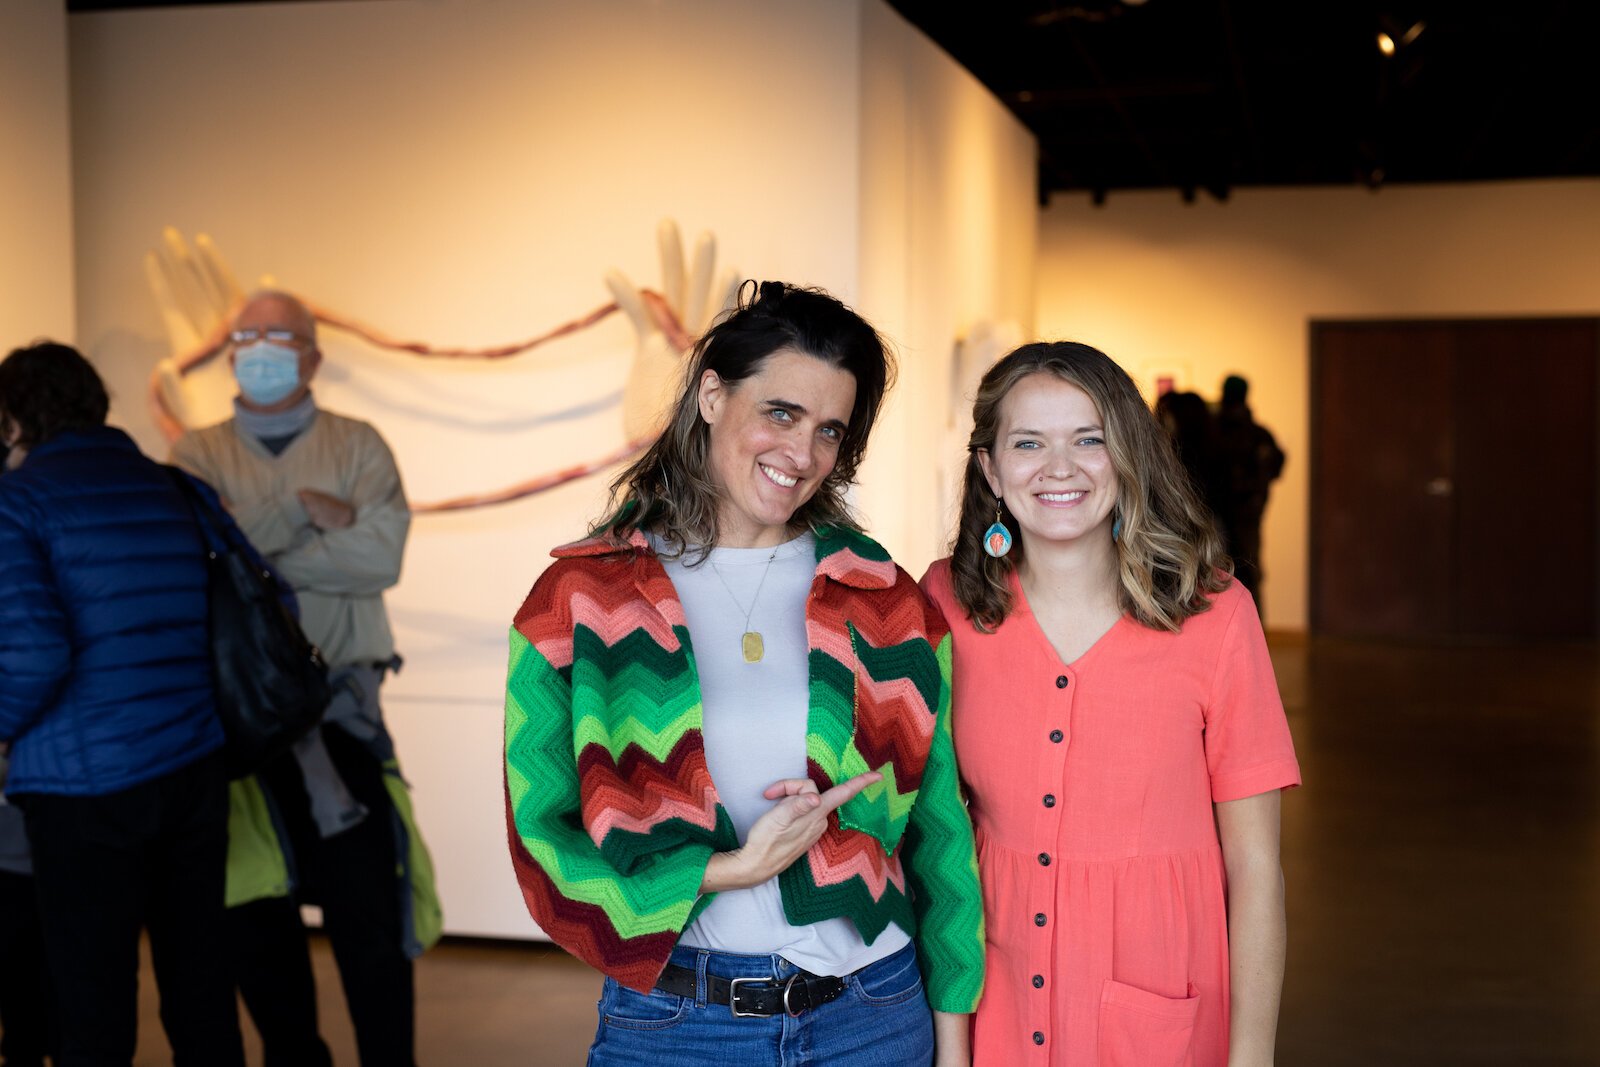 Artists Melanie Cooper Pennington and Kaylan Buteyn at a panel discussion about the Painting At Night show hosted by Artlink.